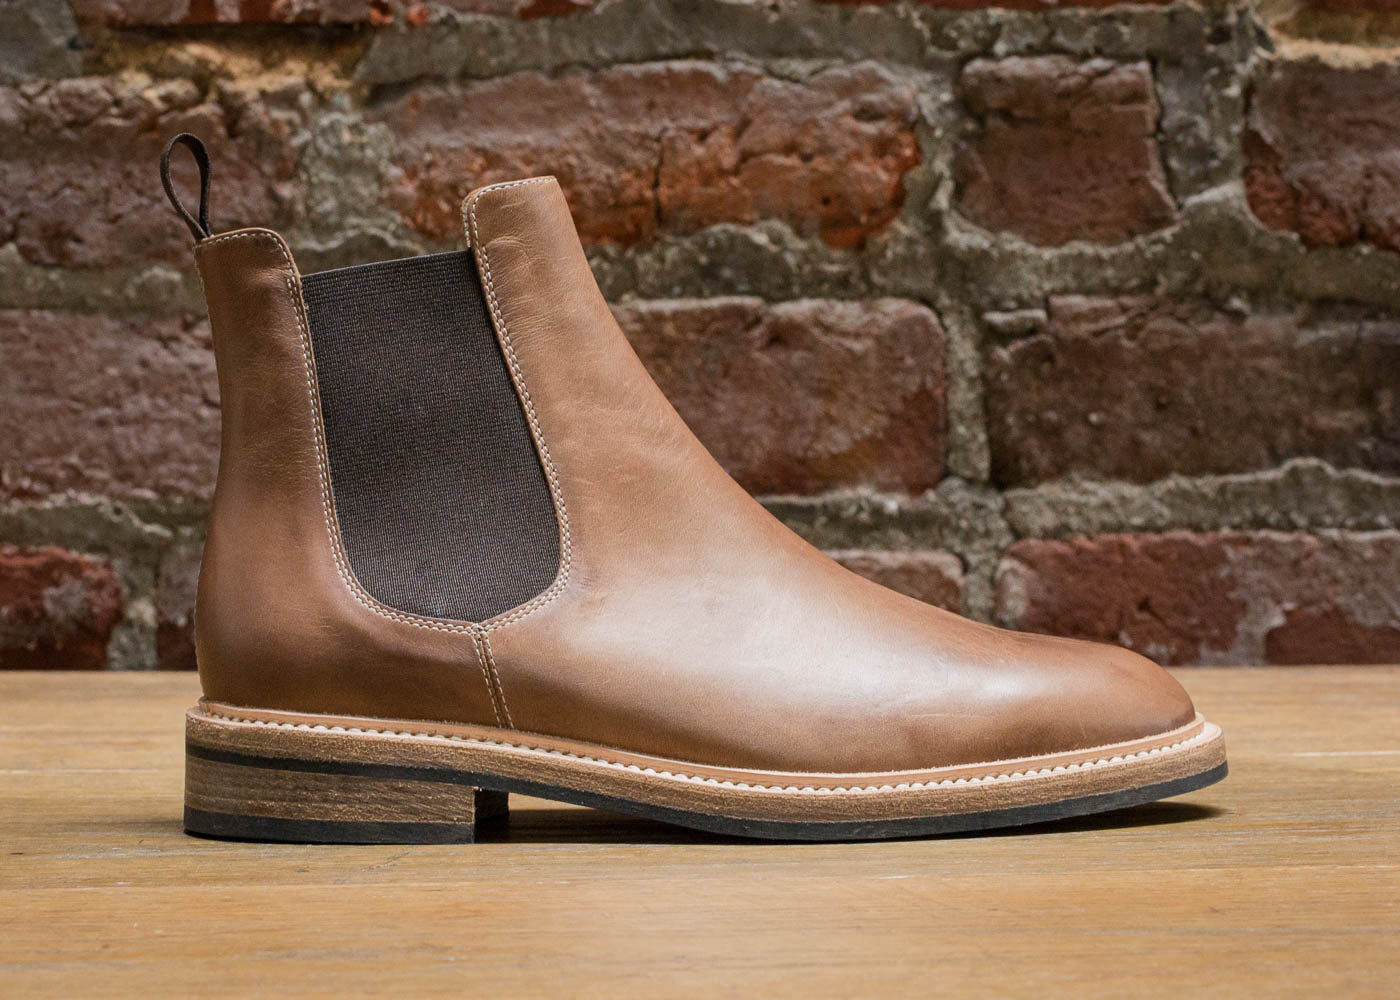 Rider Boot Co. 'Fritz' - Horween Horsefronts Natural